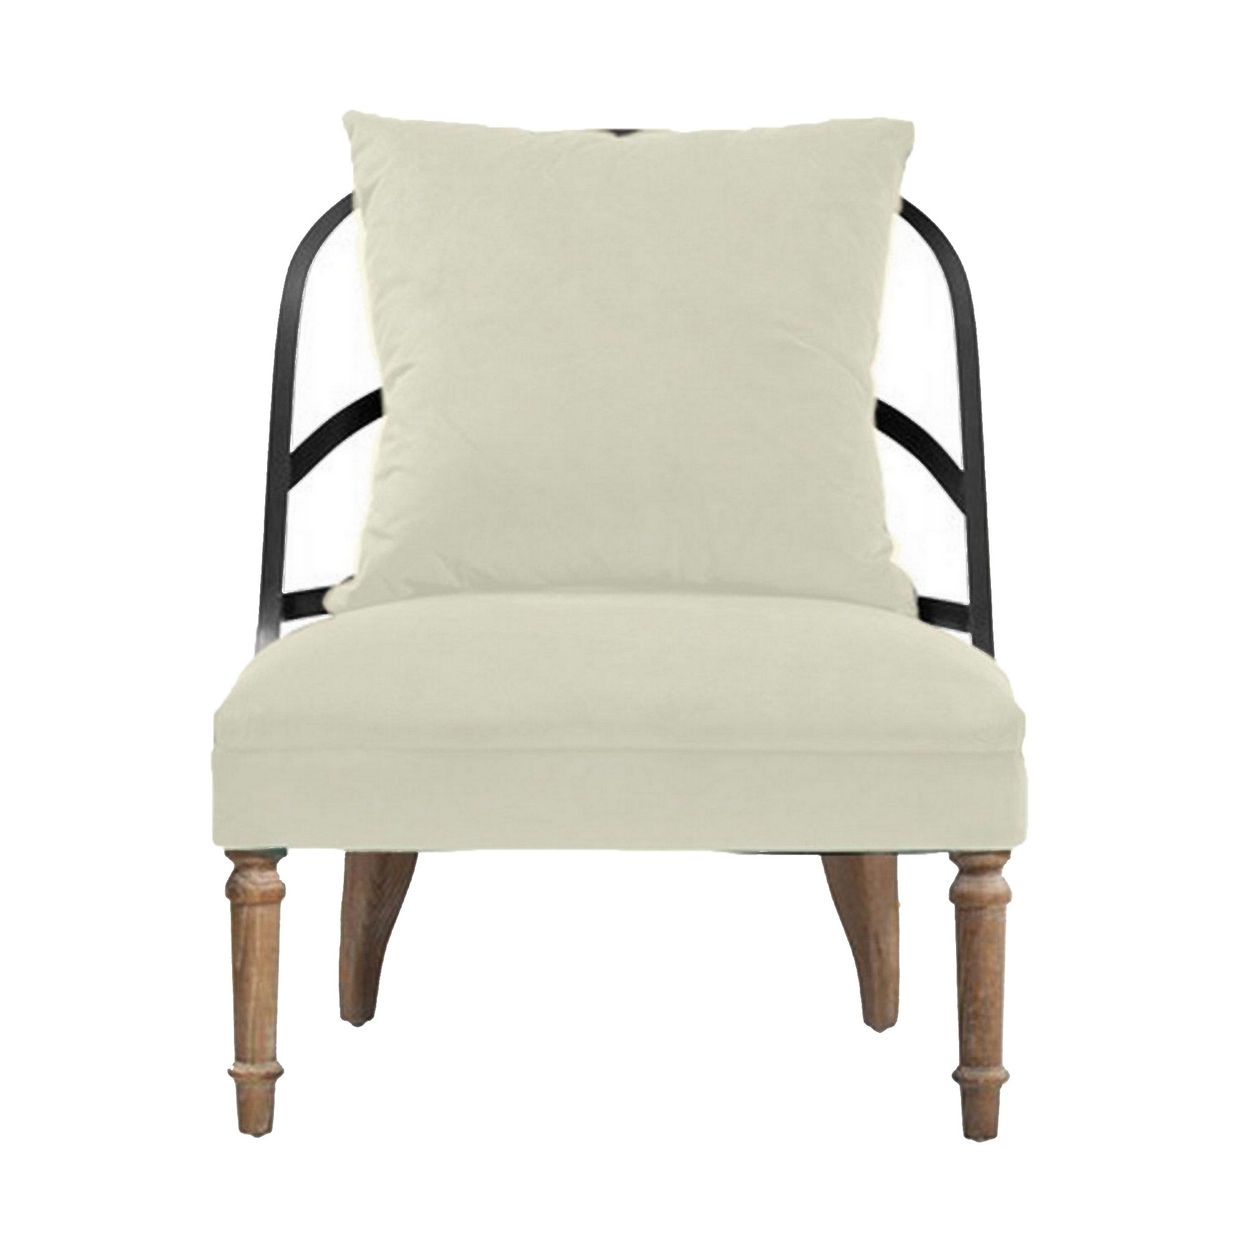 29 Inch Armless Accent Chair, Cushioned Seat And Back, Cream Linen Fabric- Saltoro Sherpi